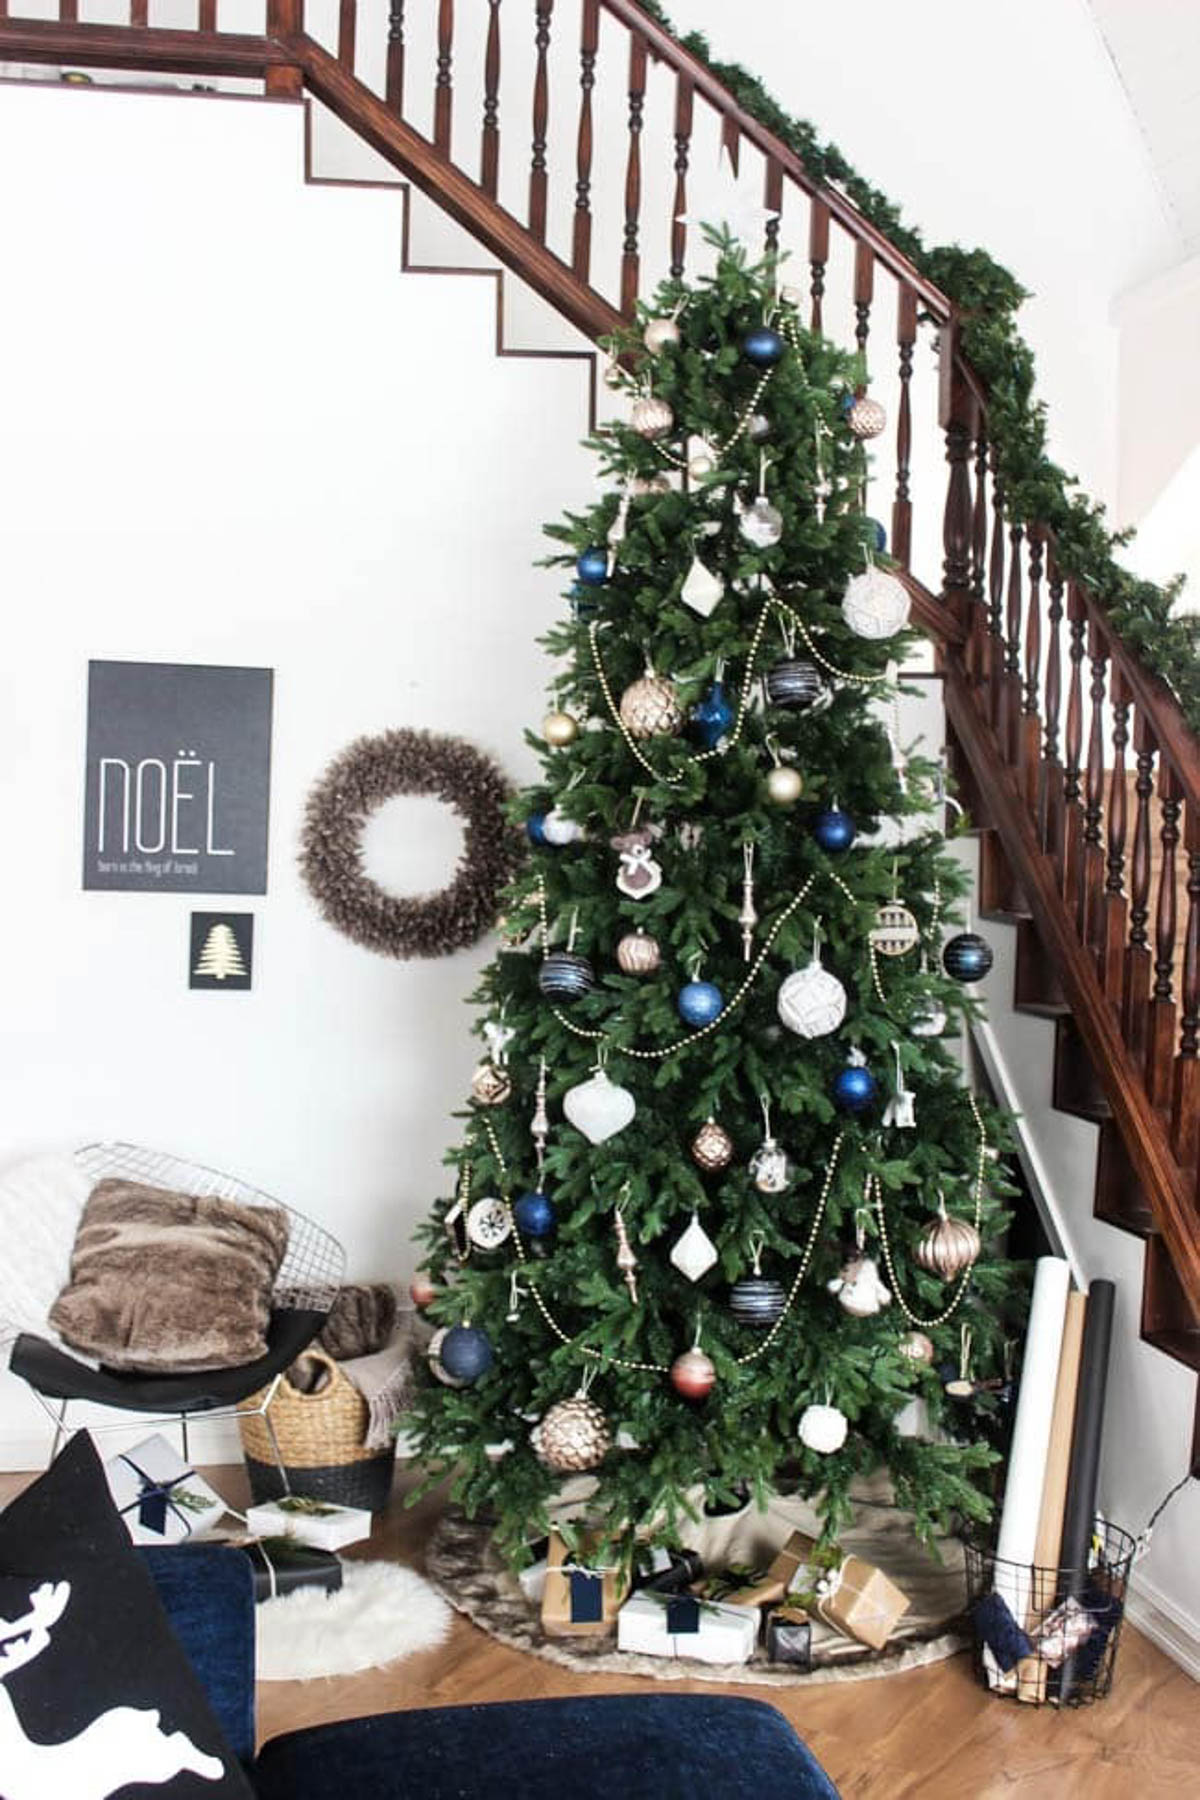 Decorated designer Christmas tree near a stairway.